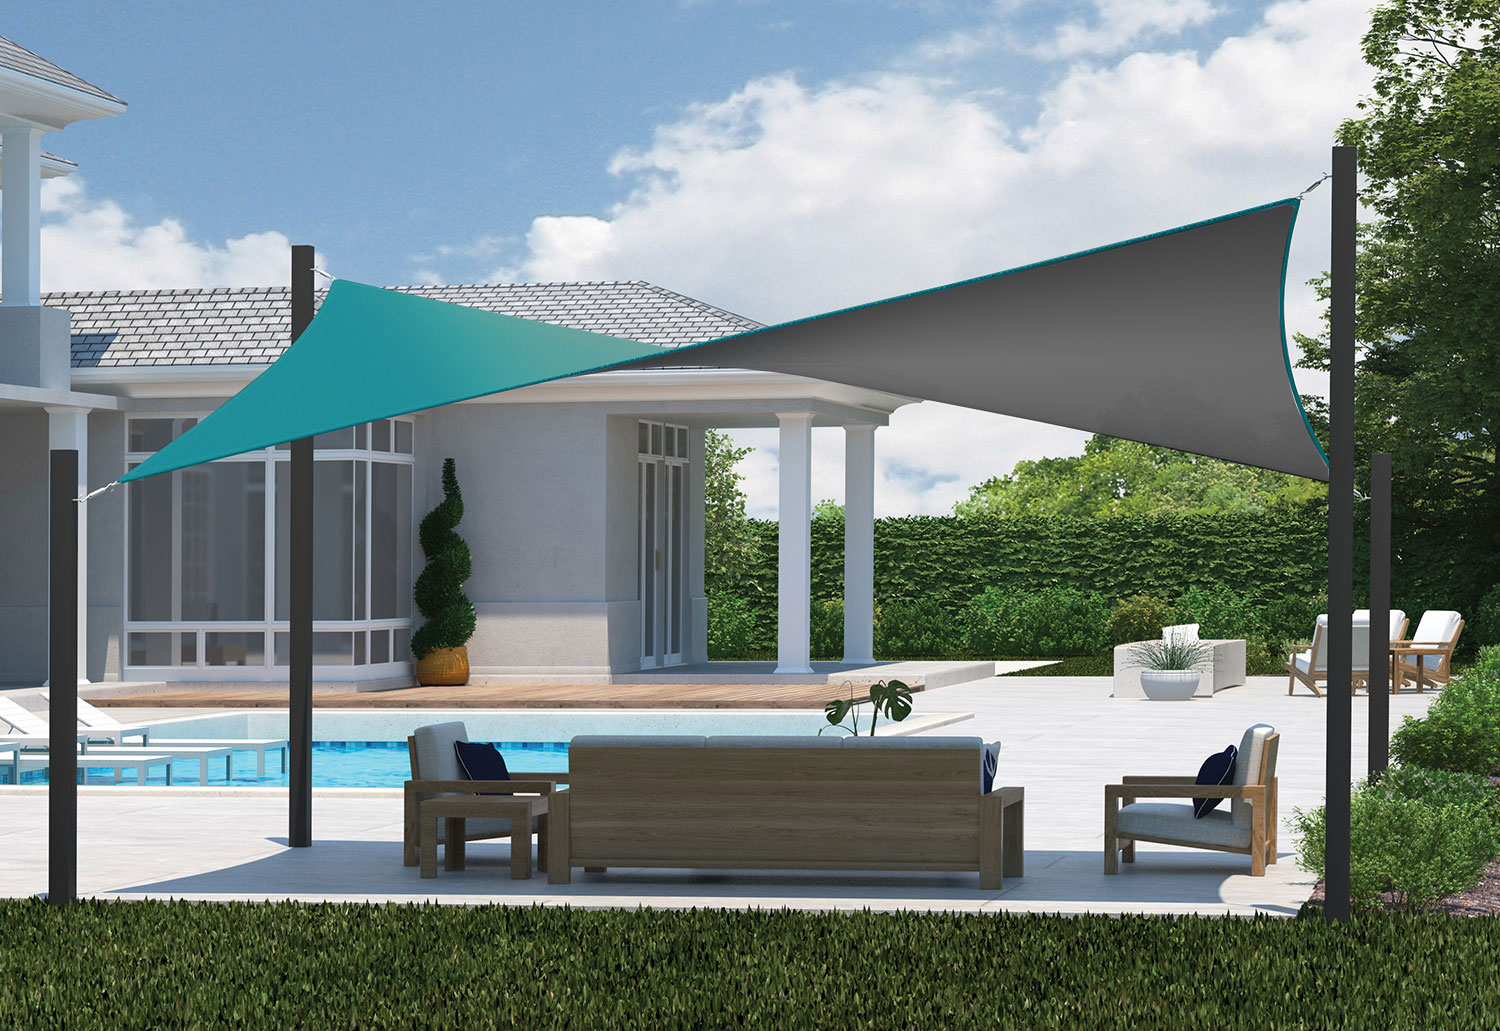 Sun Shade Sail over patio seating area for shade